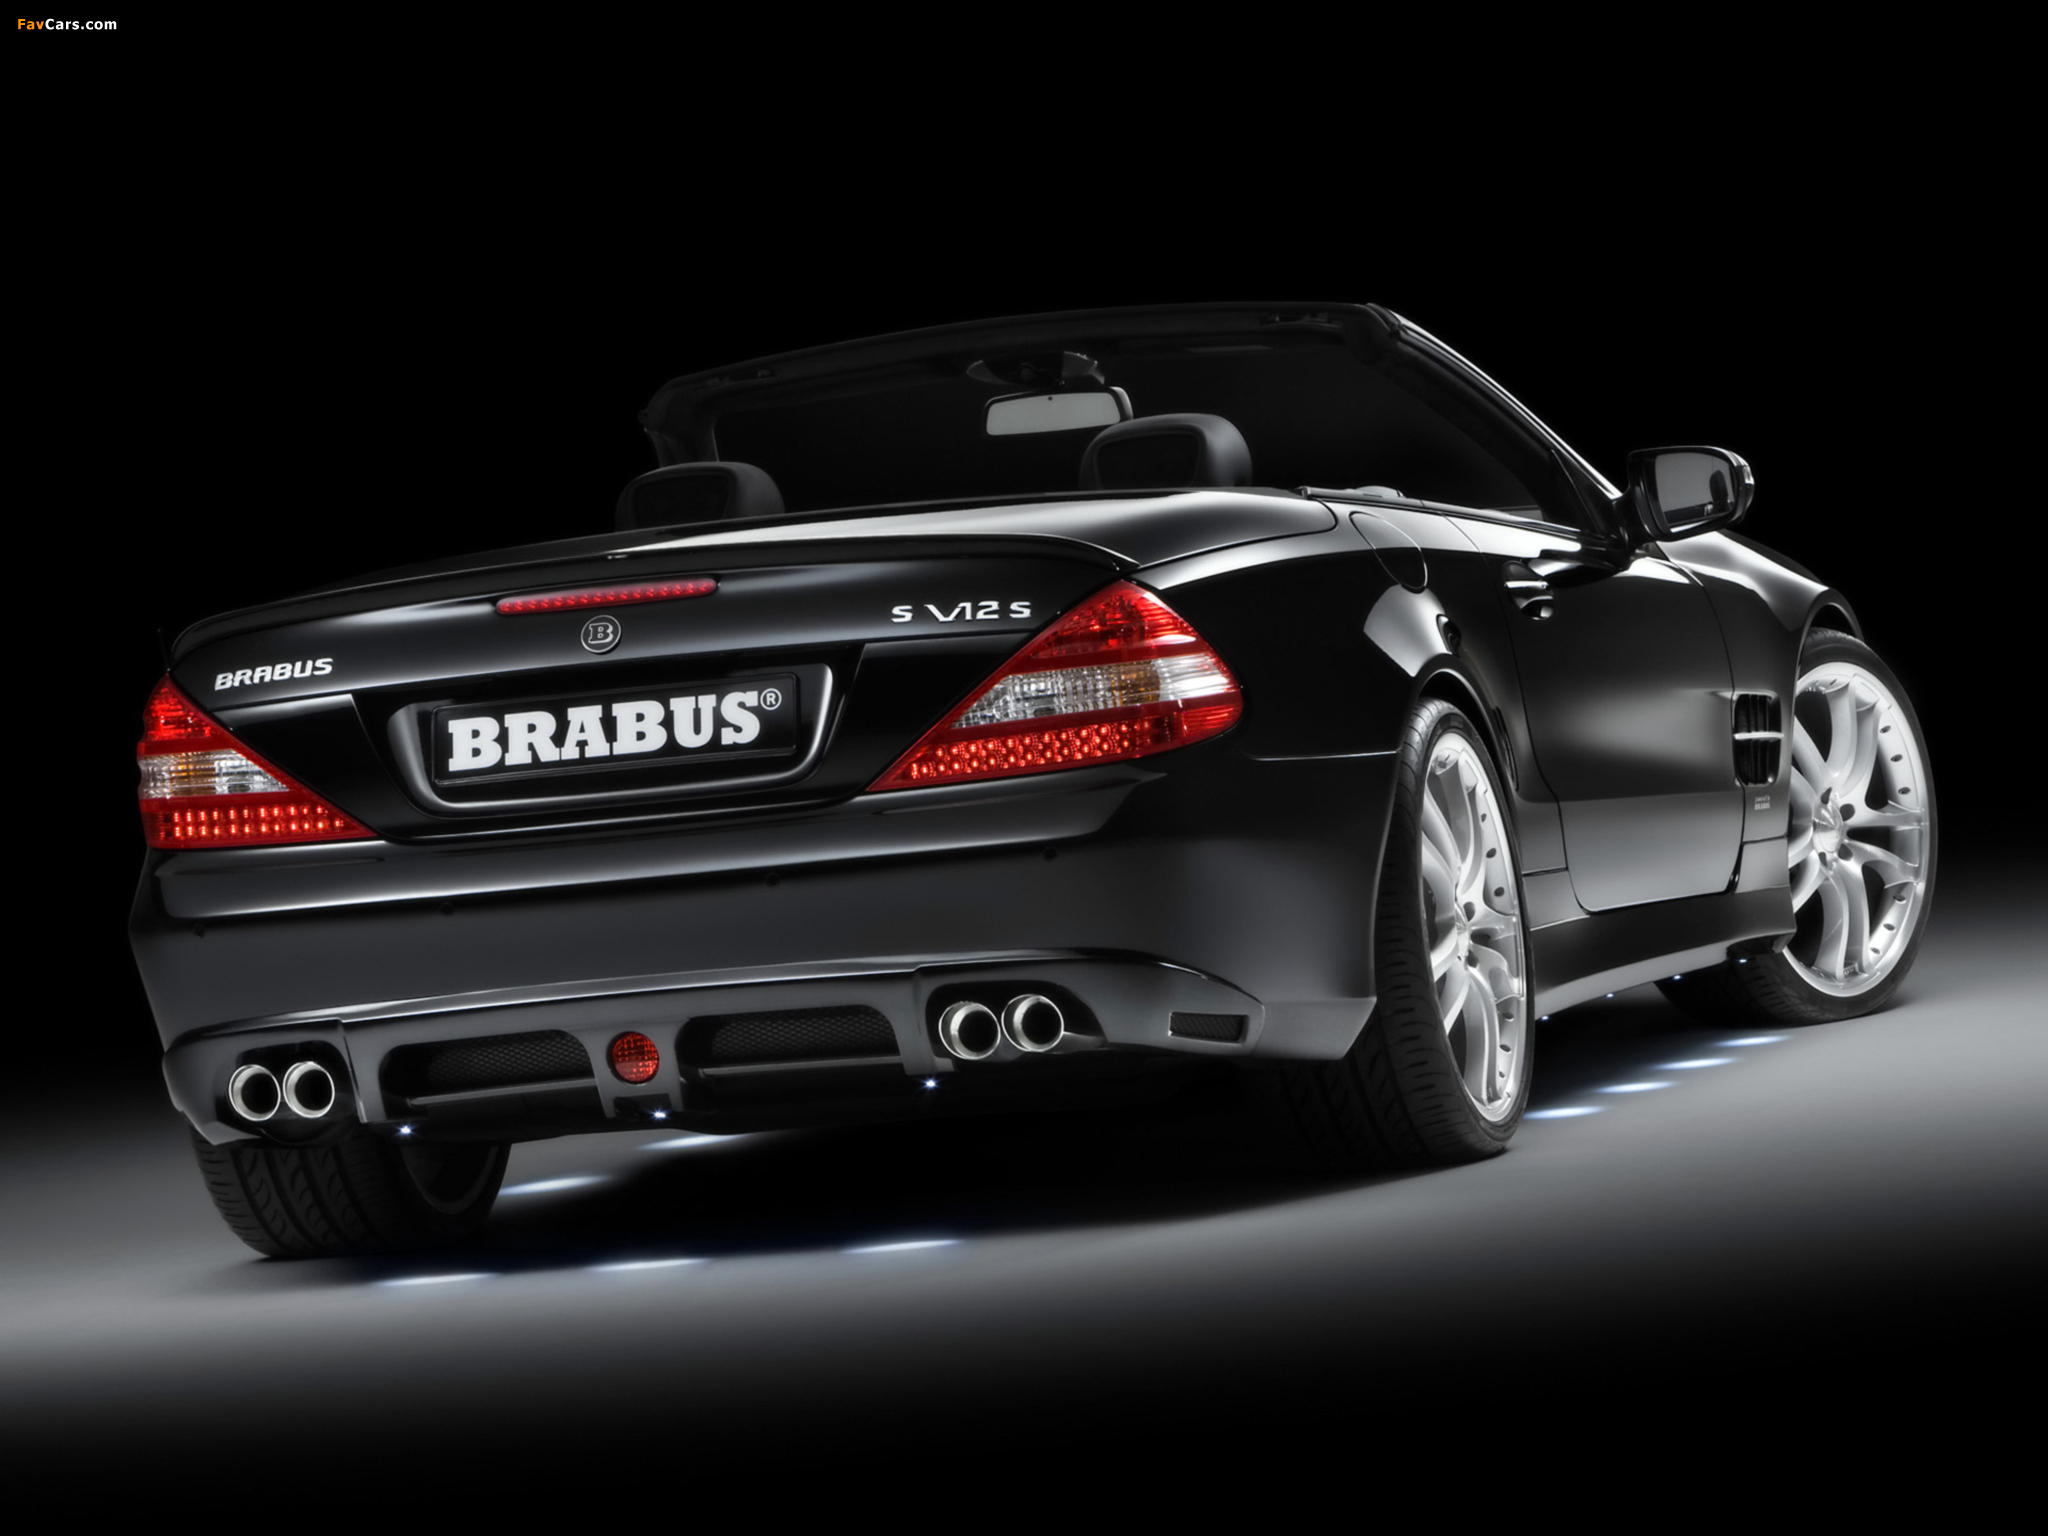 Pictures of Brabus S V12 S (R230) 2008 (2048 x 1536)